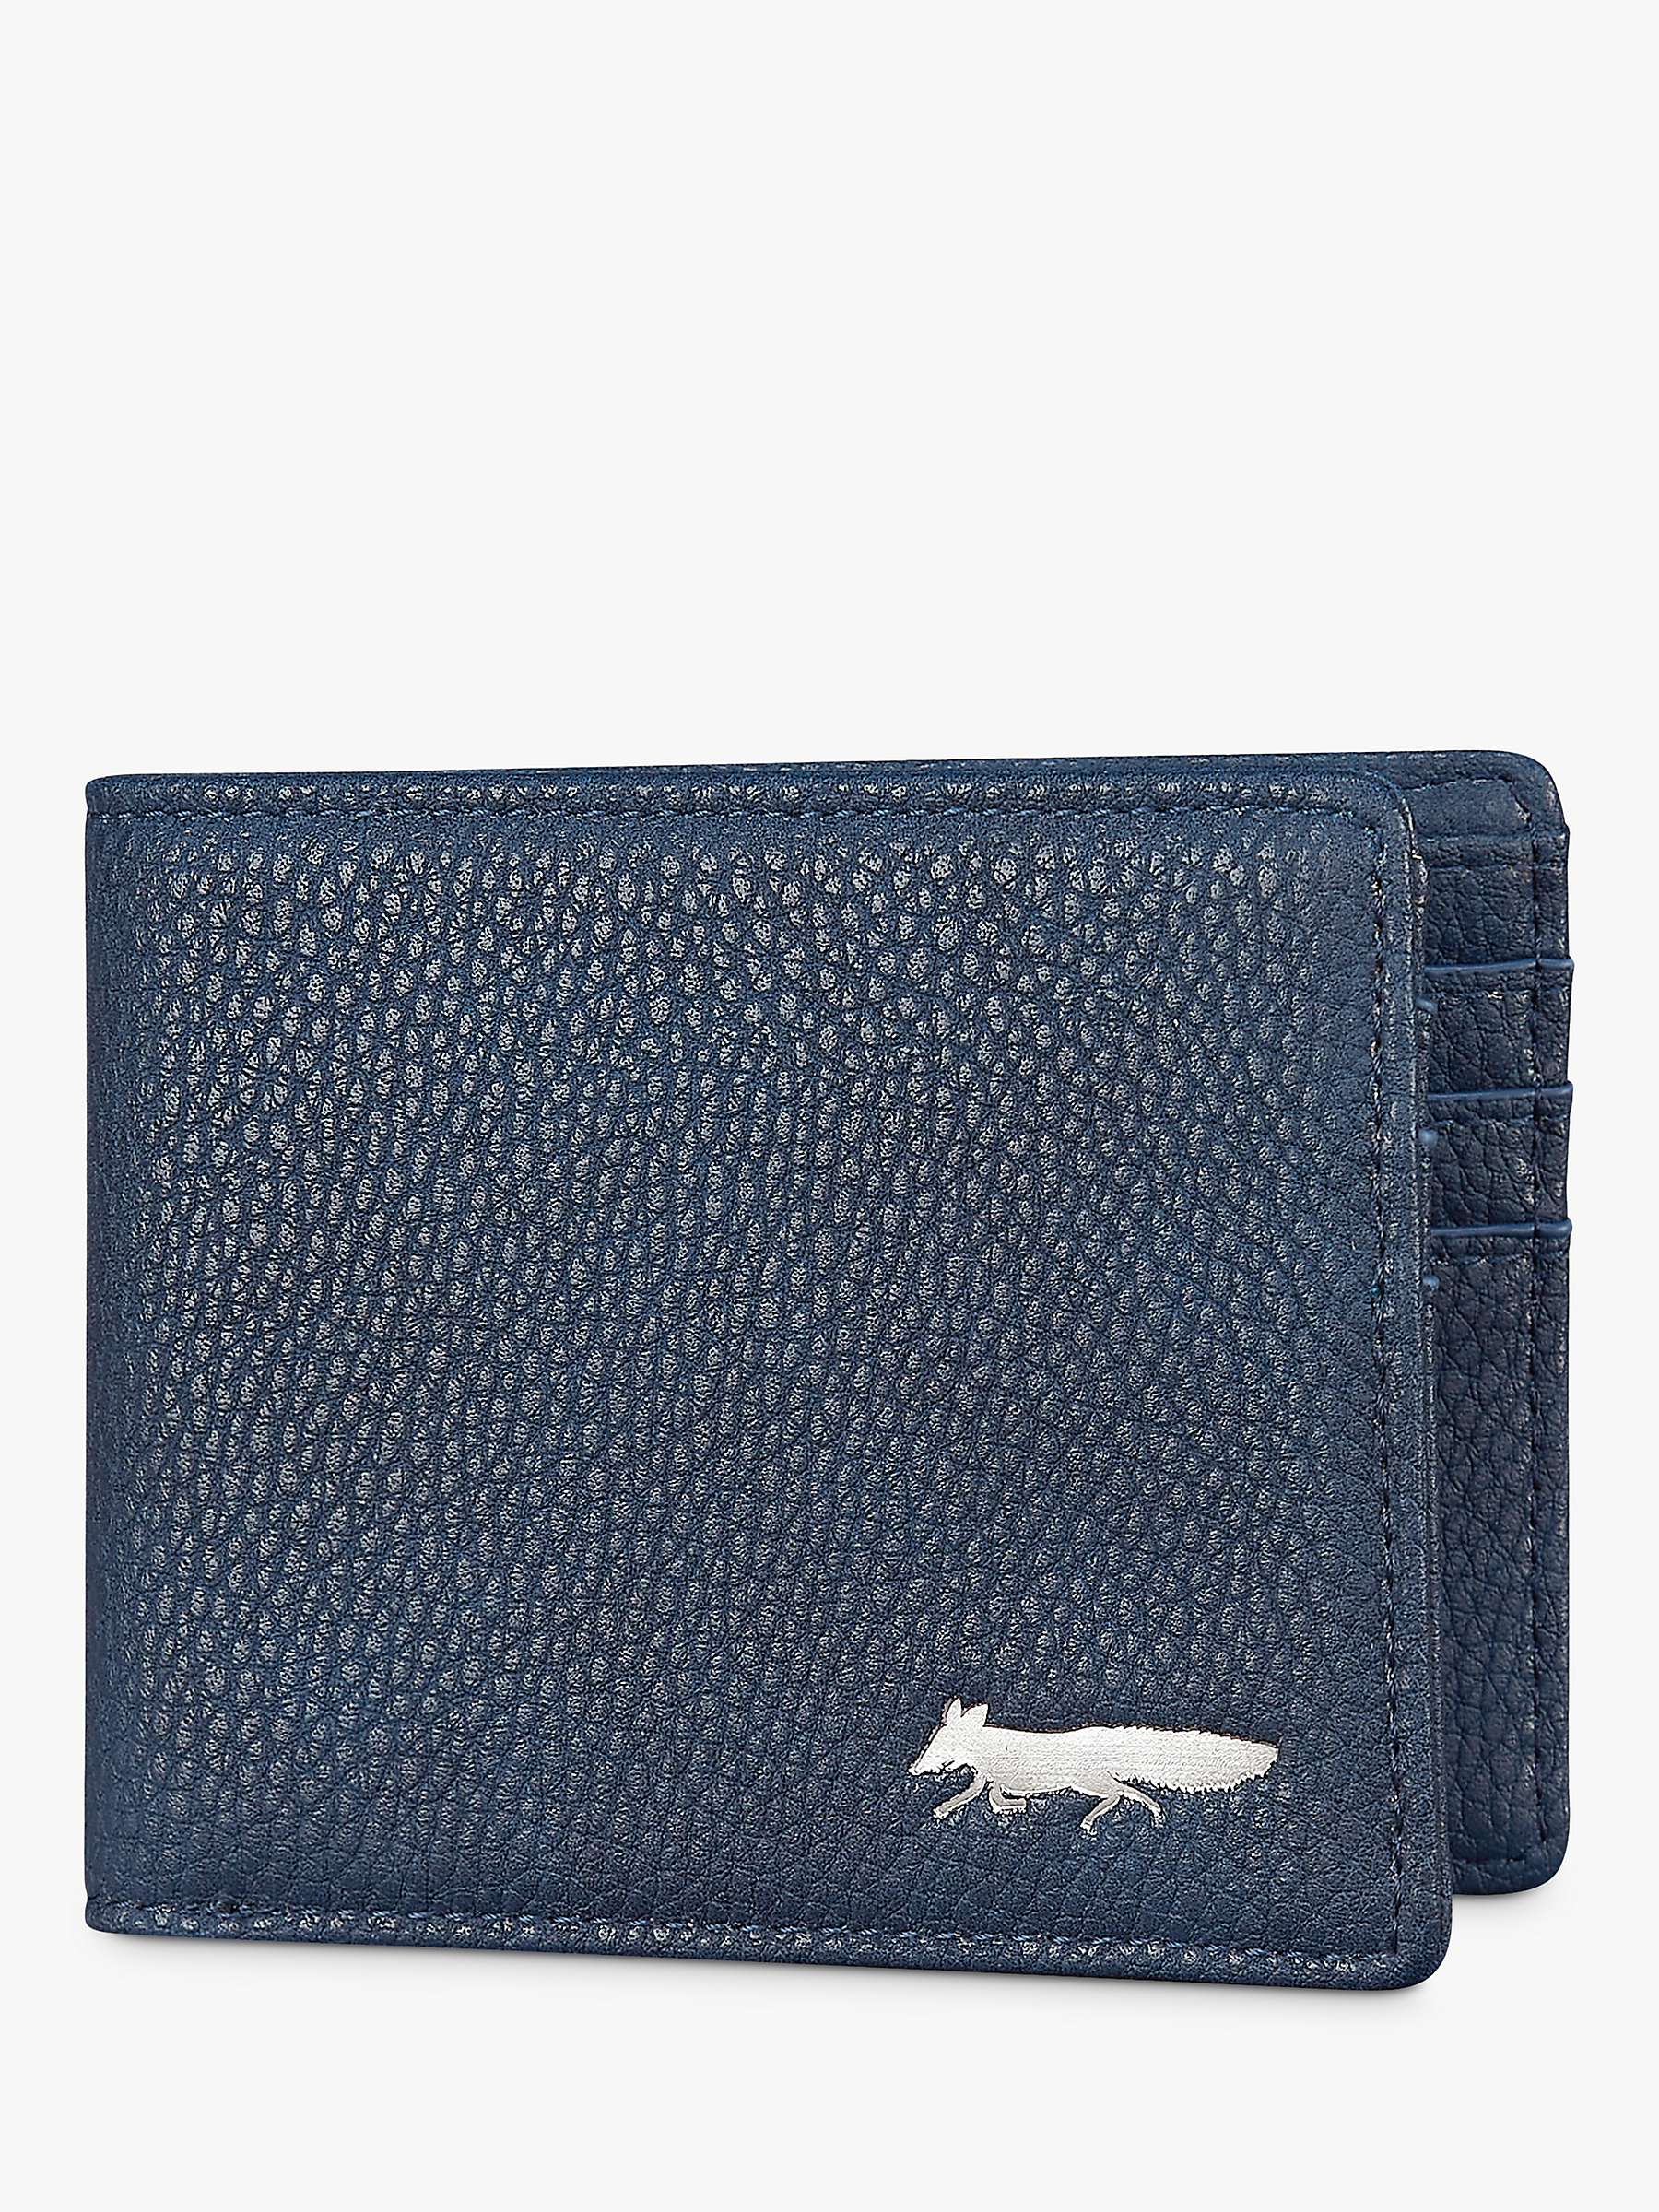 Buy Foxx Smith London Wallet Online at johnlewis.com